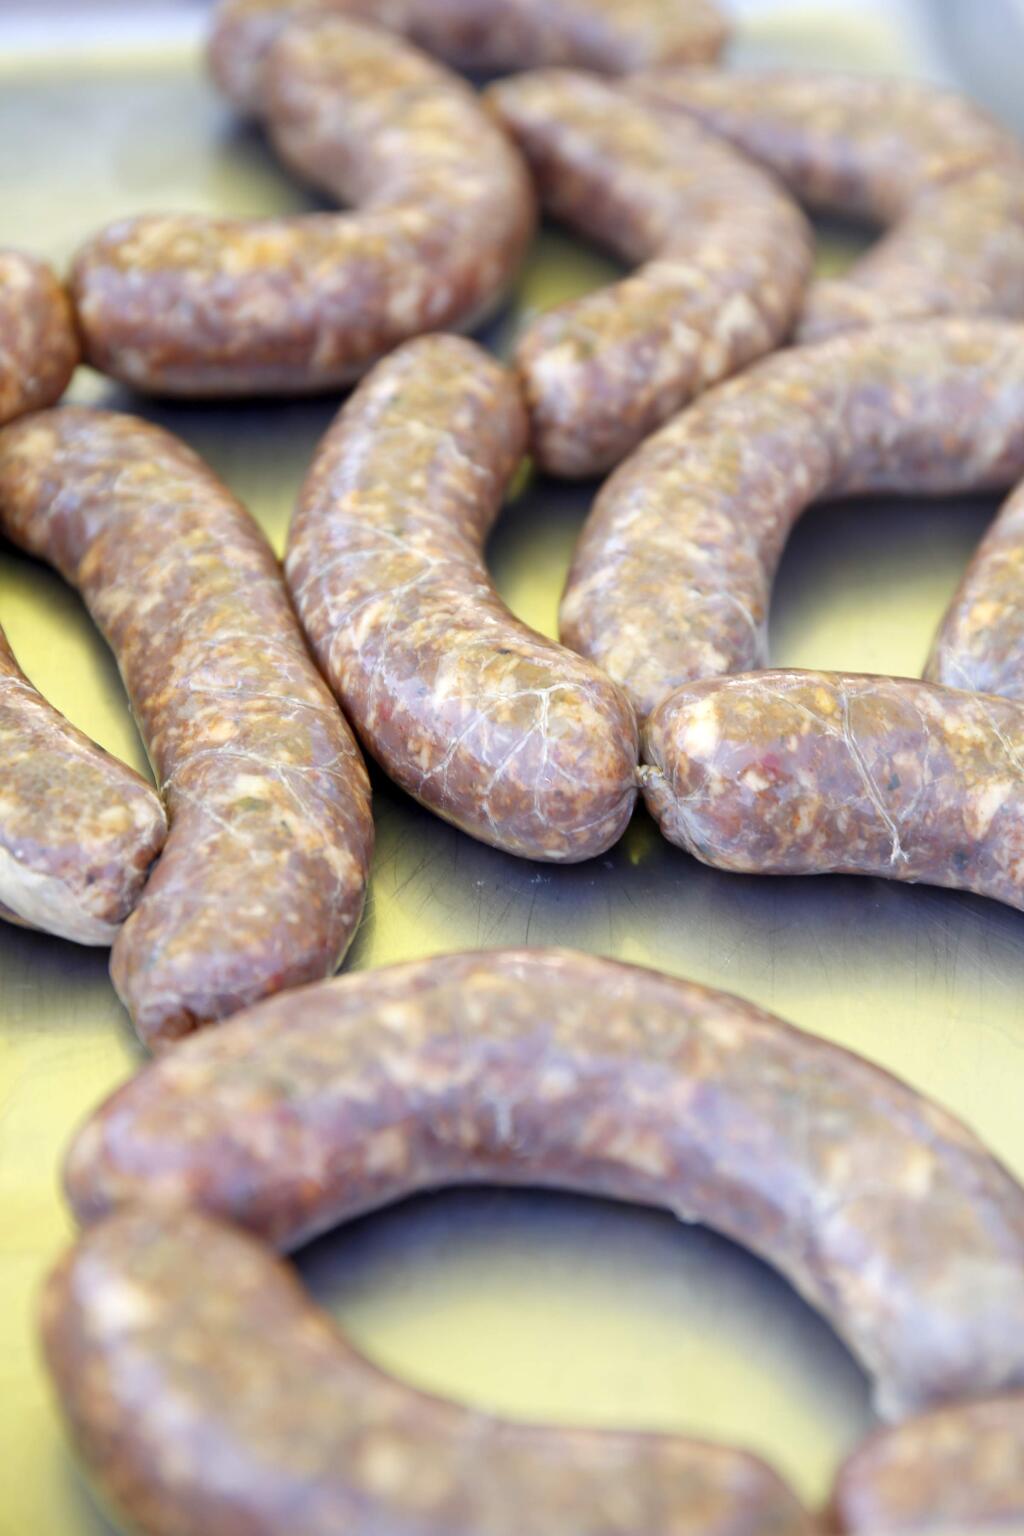 Sausages made during an artisan sausage making workshop taught by SRJC Culinary instructor Paul Kaldunski. Photo taken at his home in Sebastopol, on Tuesday, July 14, 2015. (BETH SCHLANKER/ The Press Democrat)